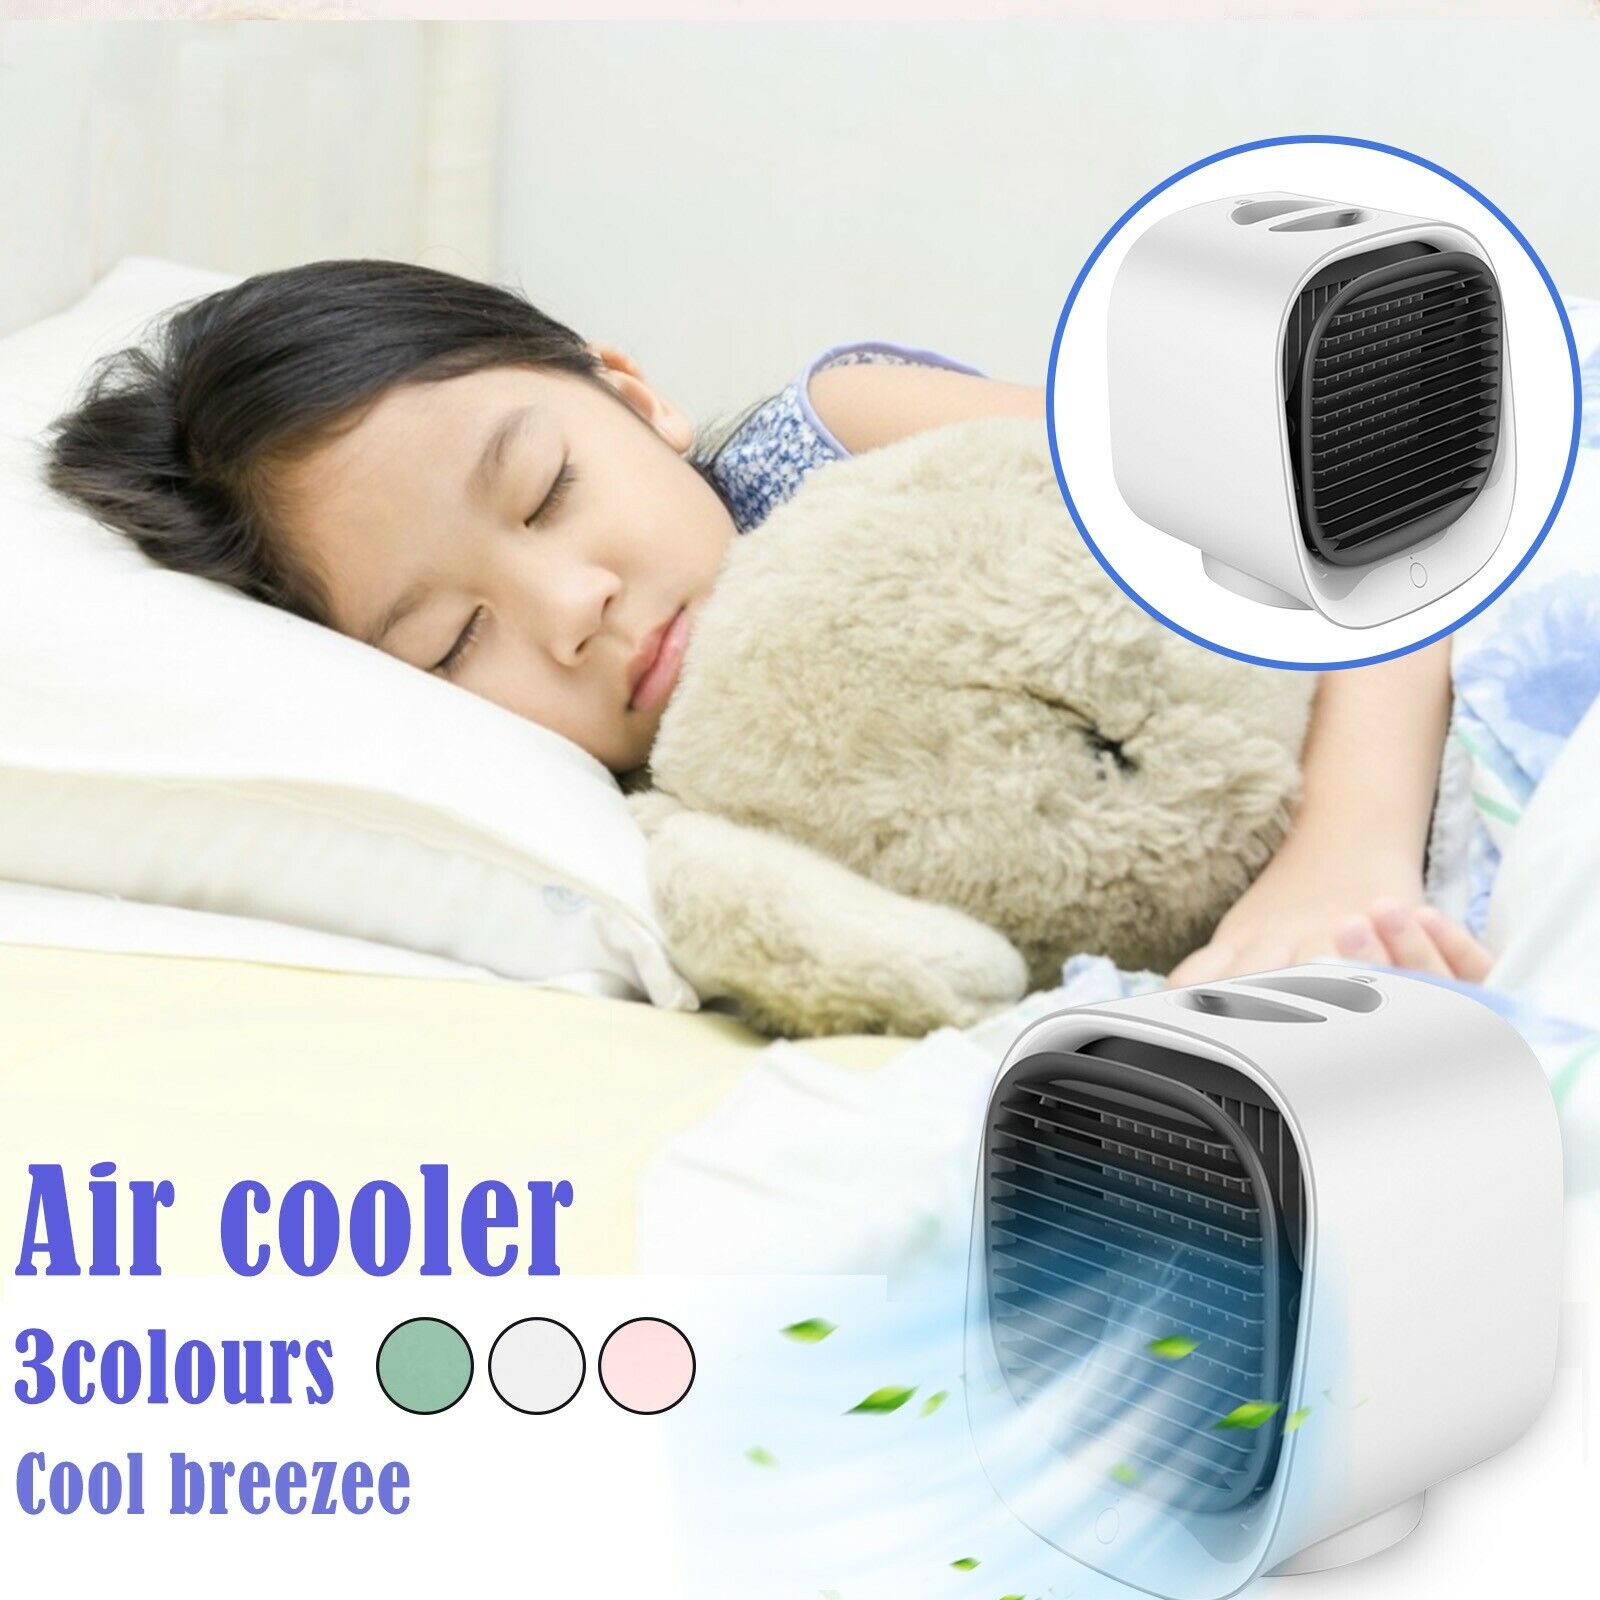 Small Desktop Cooler Humidifying Air Air Air Cold Purifying Fan Conditioner Usb